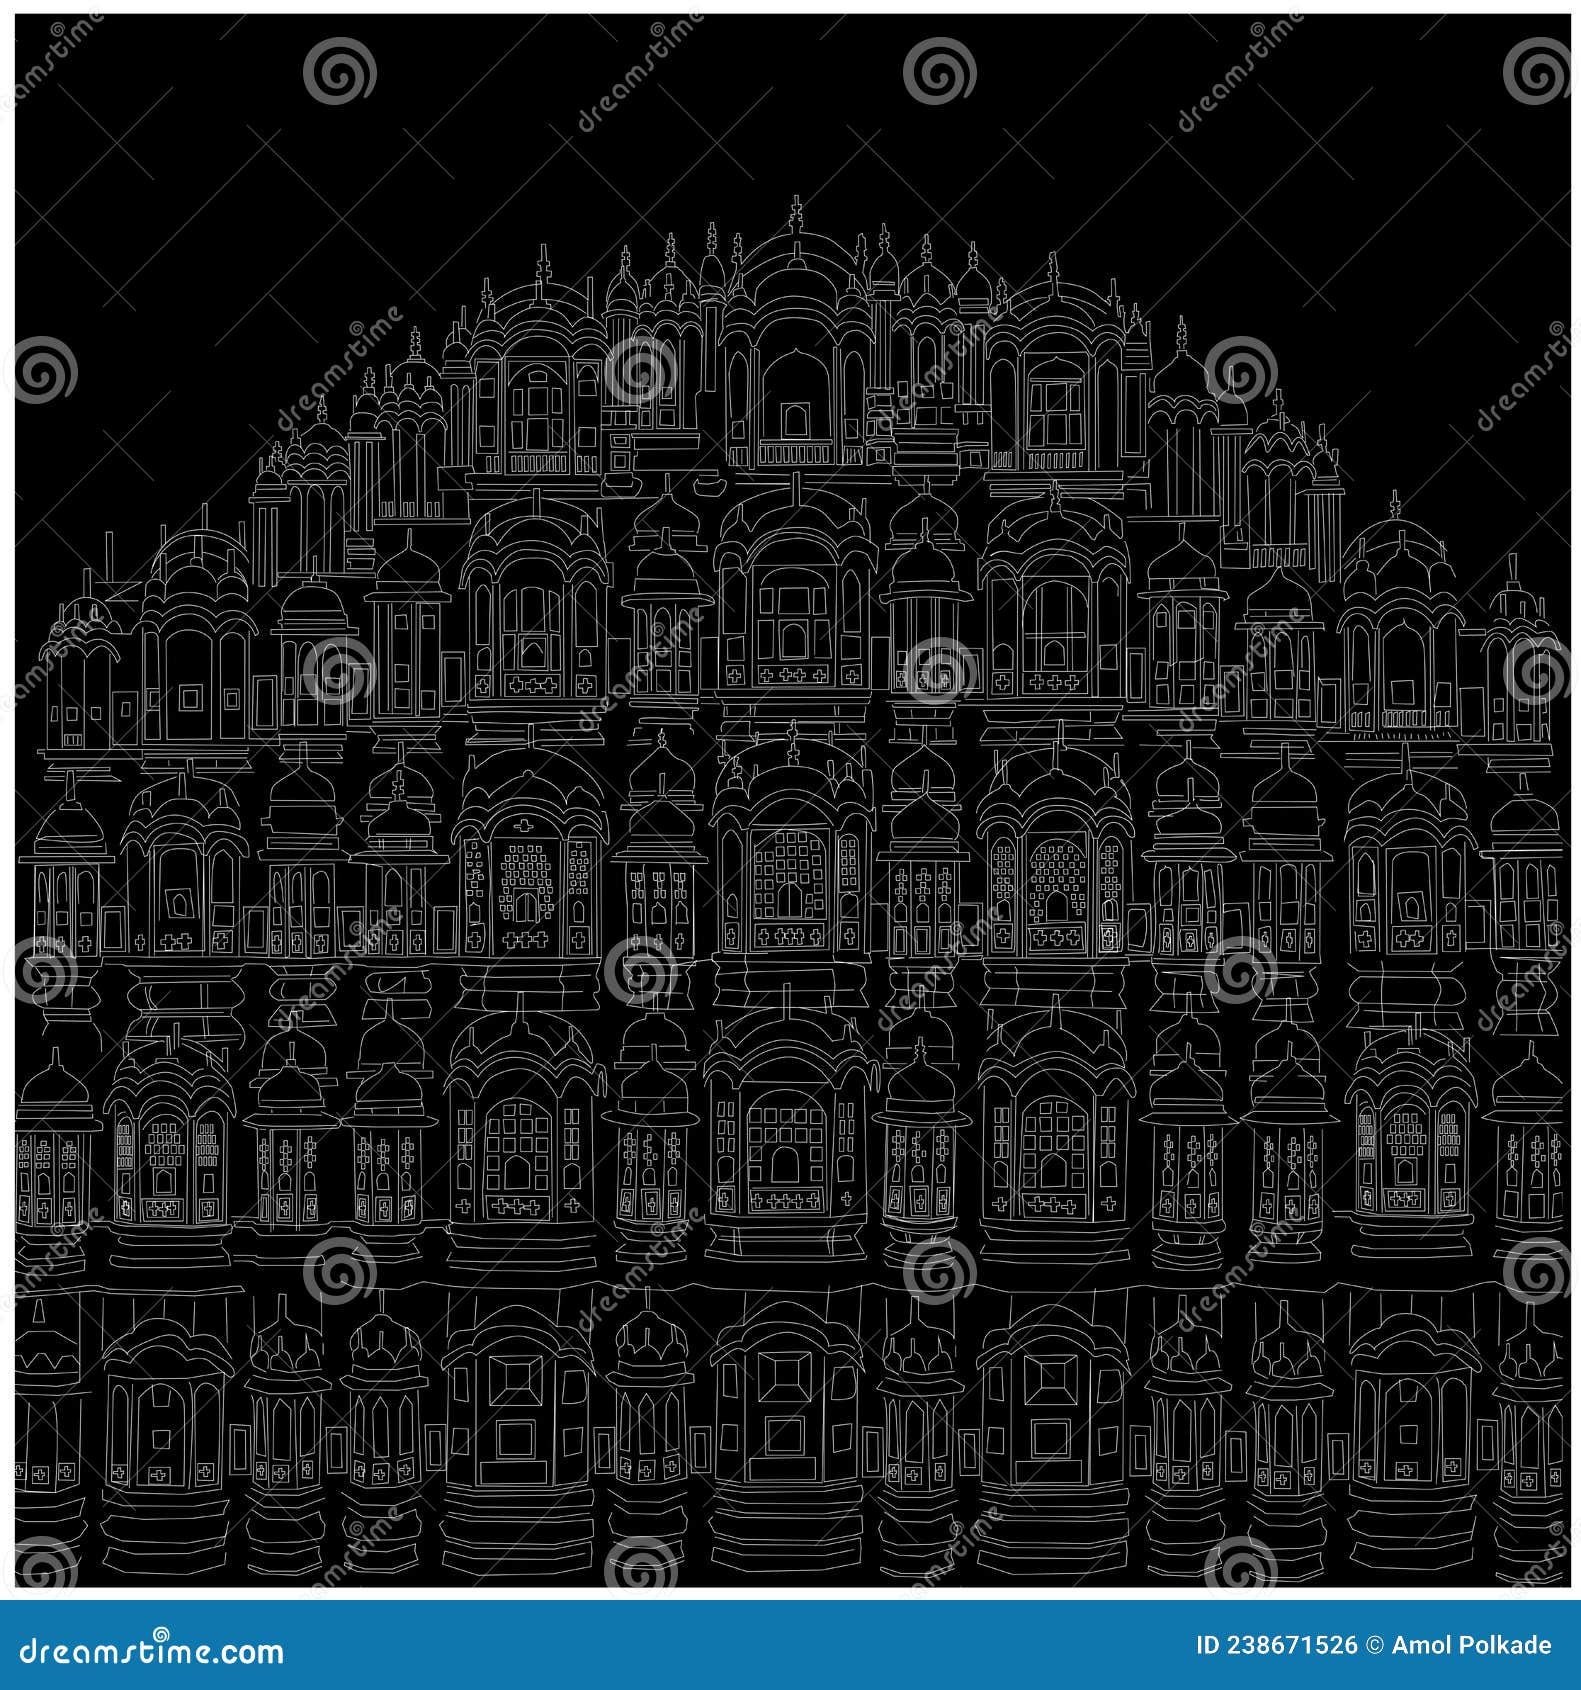 Hawa Mahal - Palace of winds by m-AES-tro.deviantart.com on @DeviantArt |  Modern art canvas painting, Architecture drawing art, Surreal art